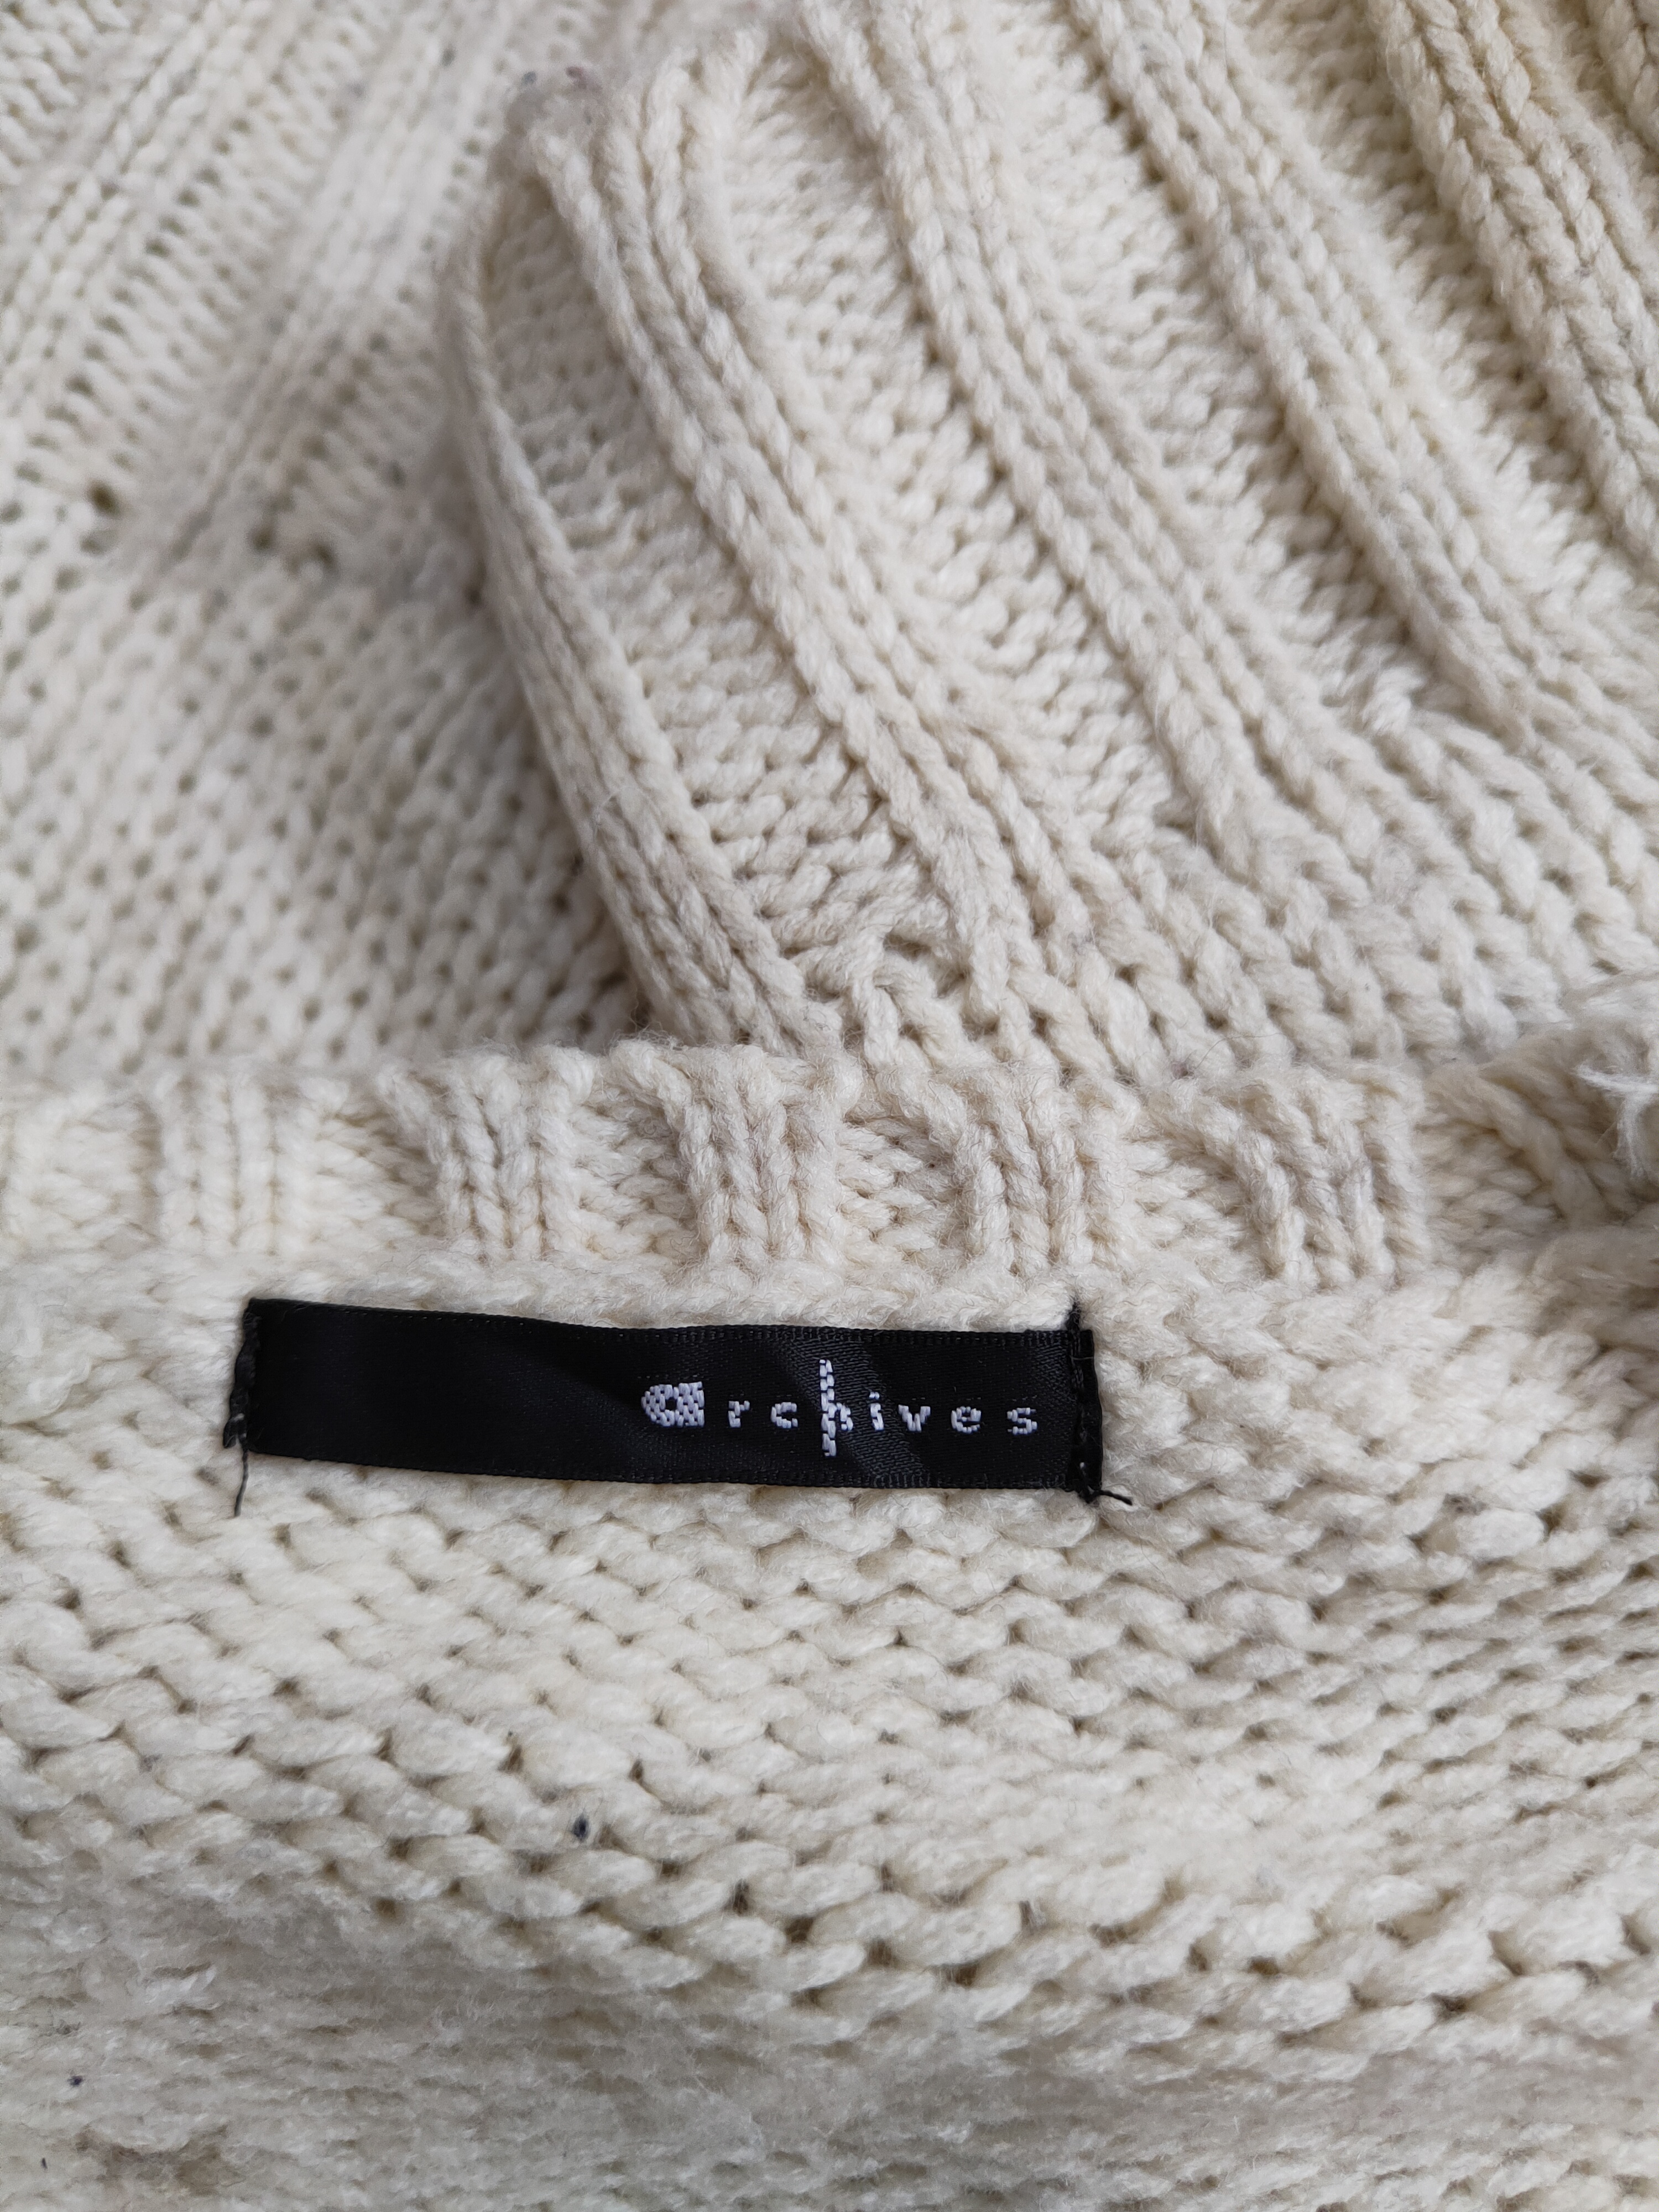 Japanese Brand - Archives White Knitwear Sweater Damage With Stain - 11